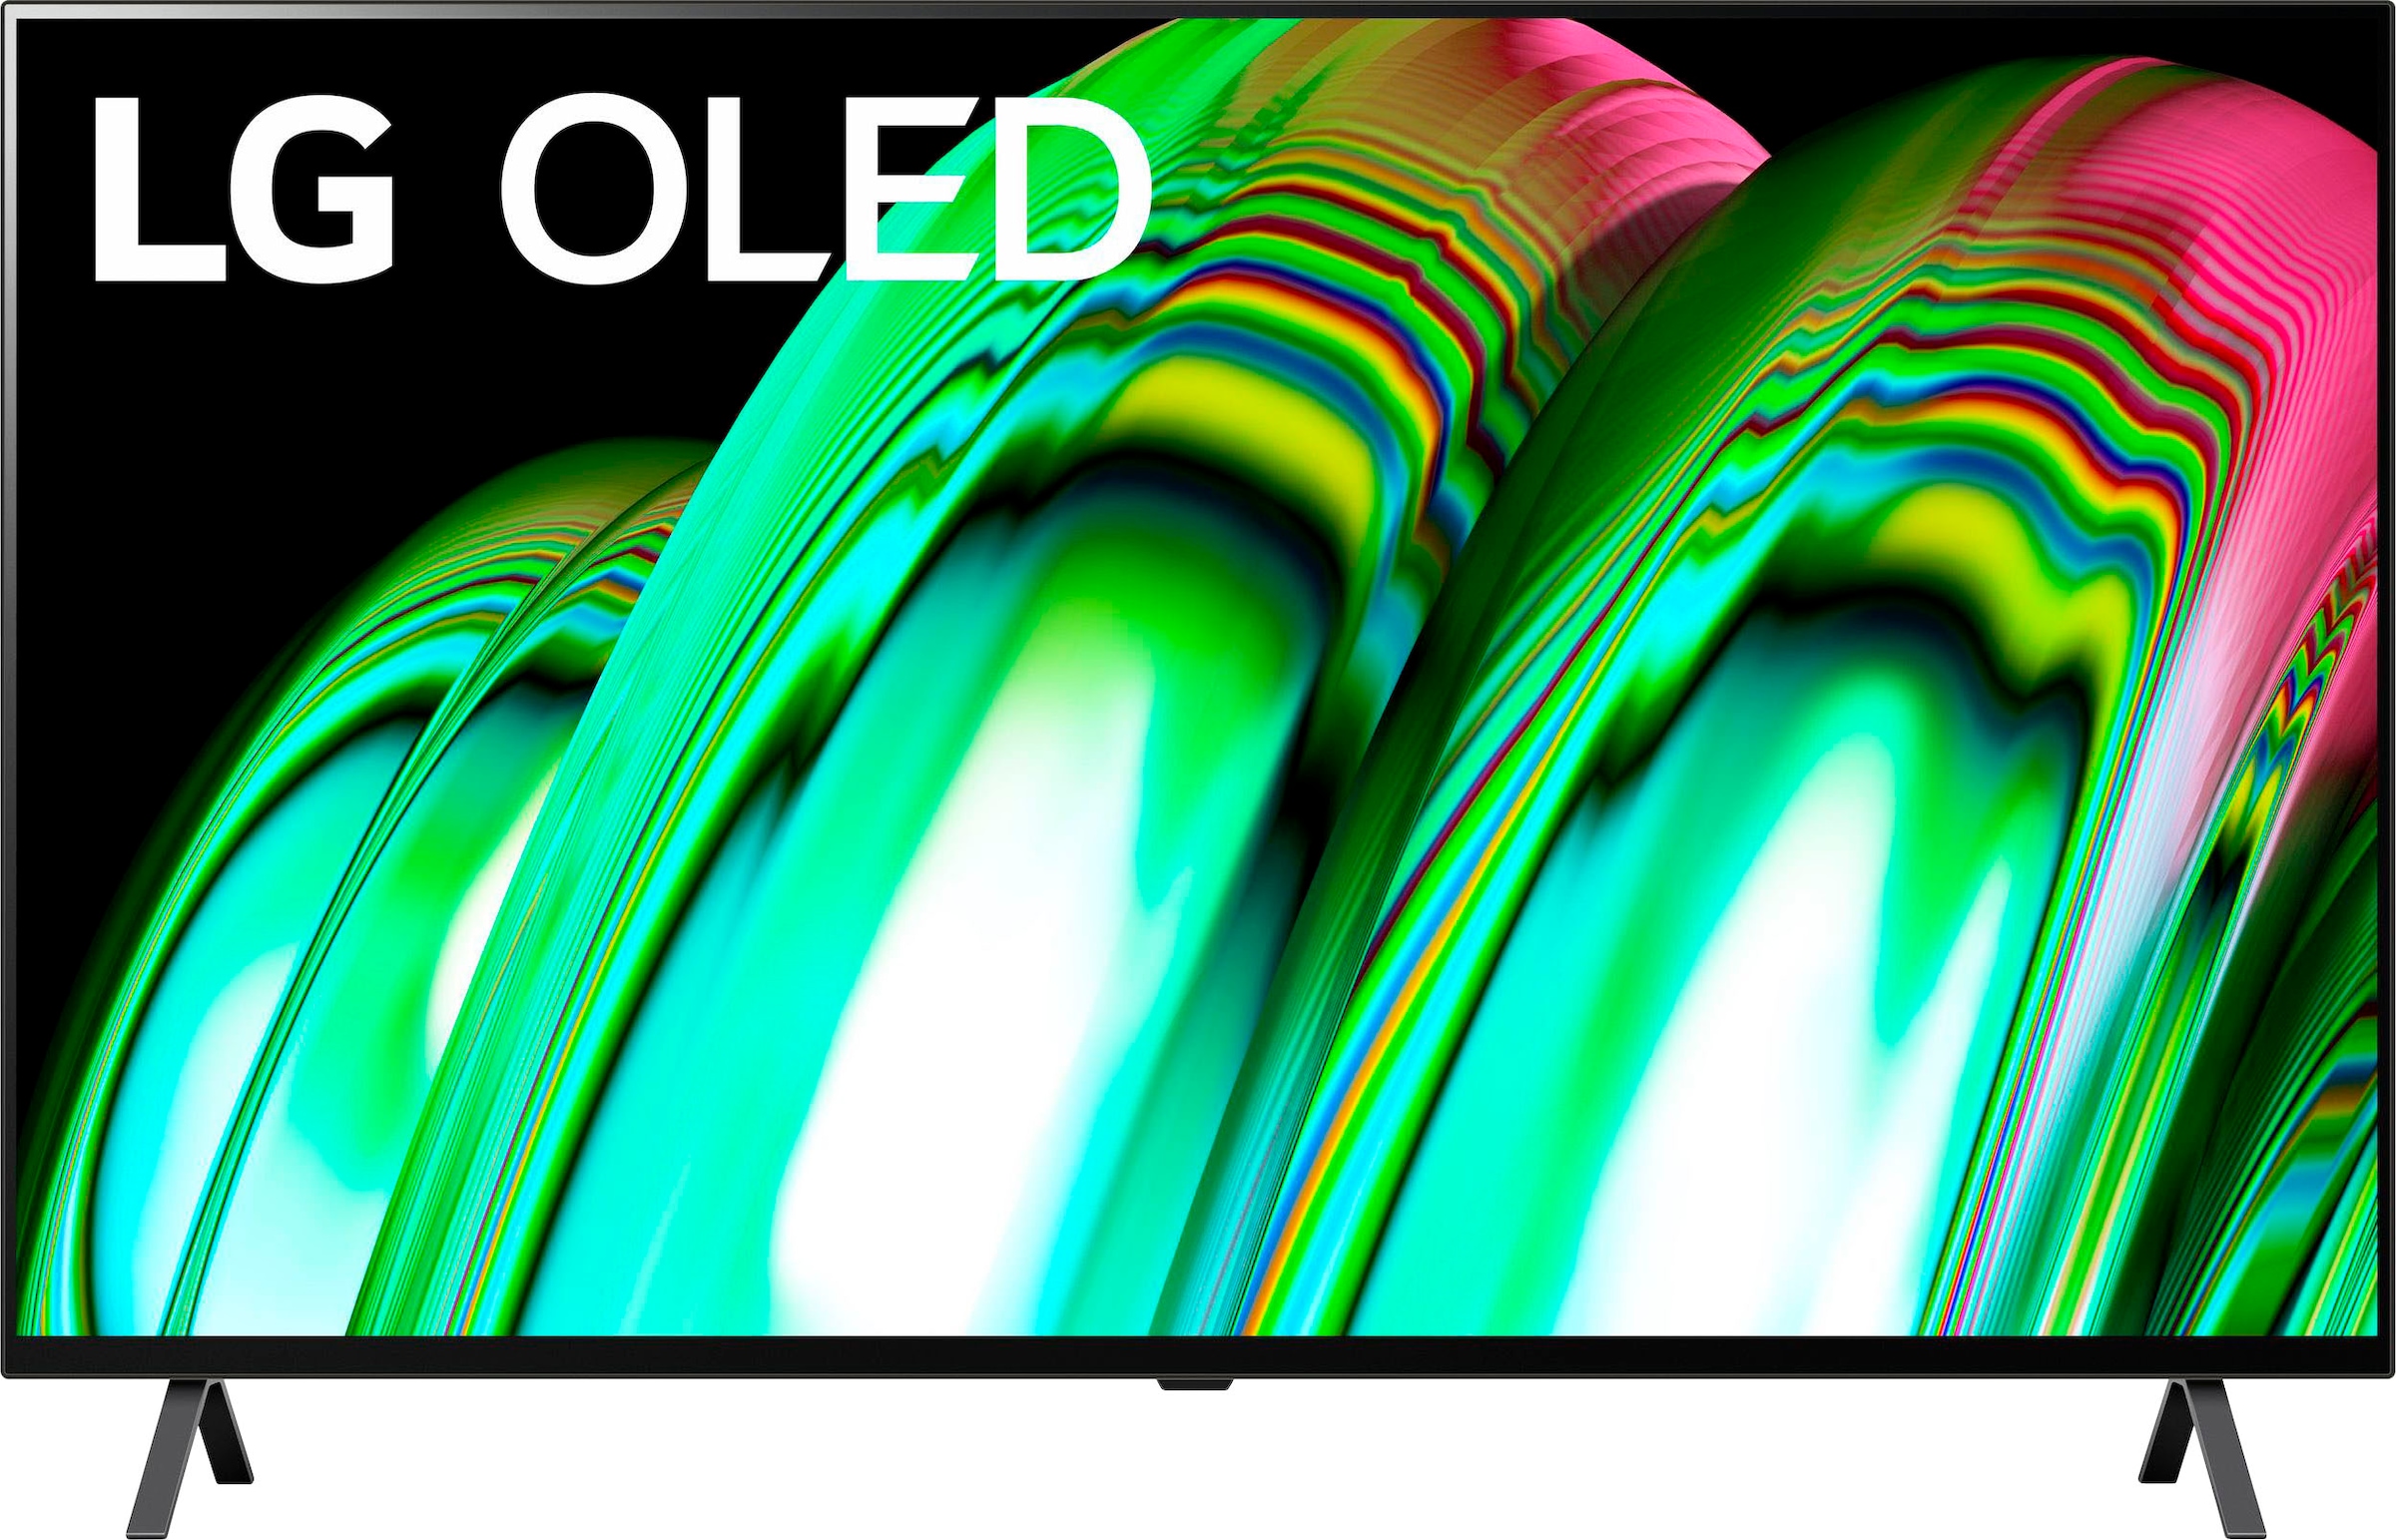 Tuner Gen5 Ultra OTTO Smart-TV, jetzt 139 LG OLED-Fernseher »OLED55A29LA«, AI-Prozessor-Dolby Vision Triple & bei cm/55 4K HD, 4K OLED-α7 online Zoll, Atmos-Single